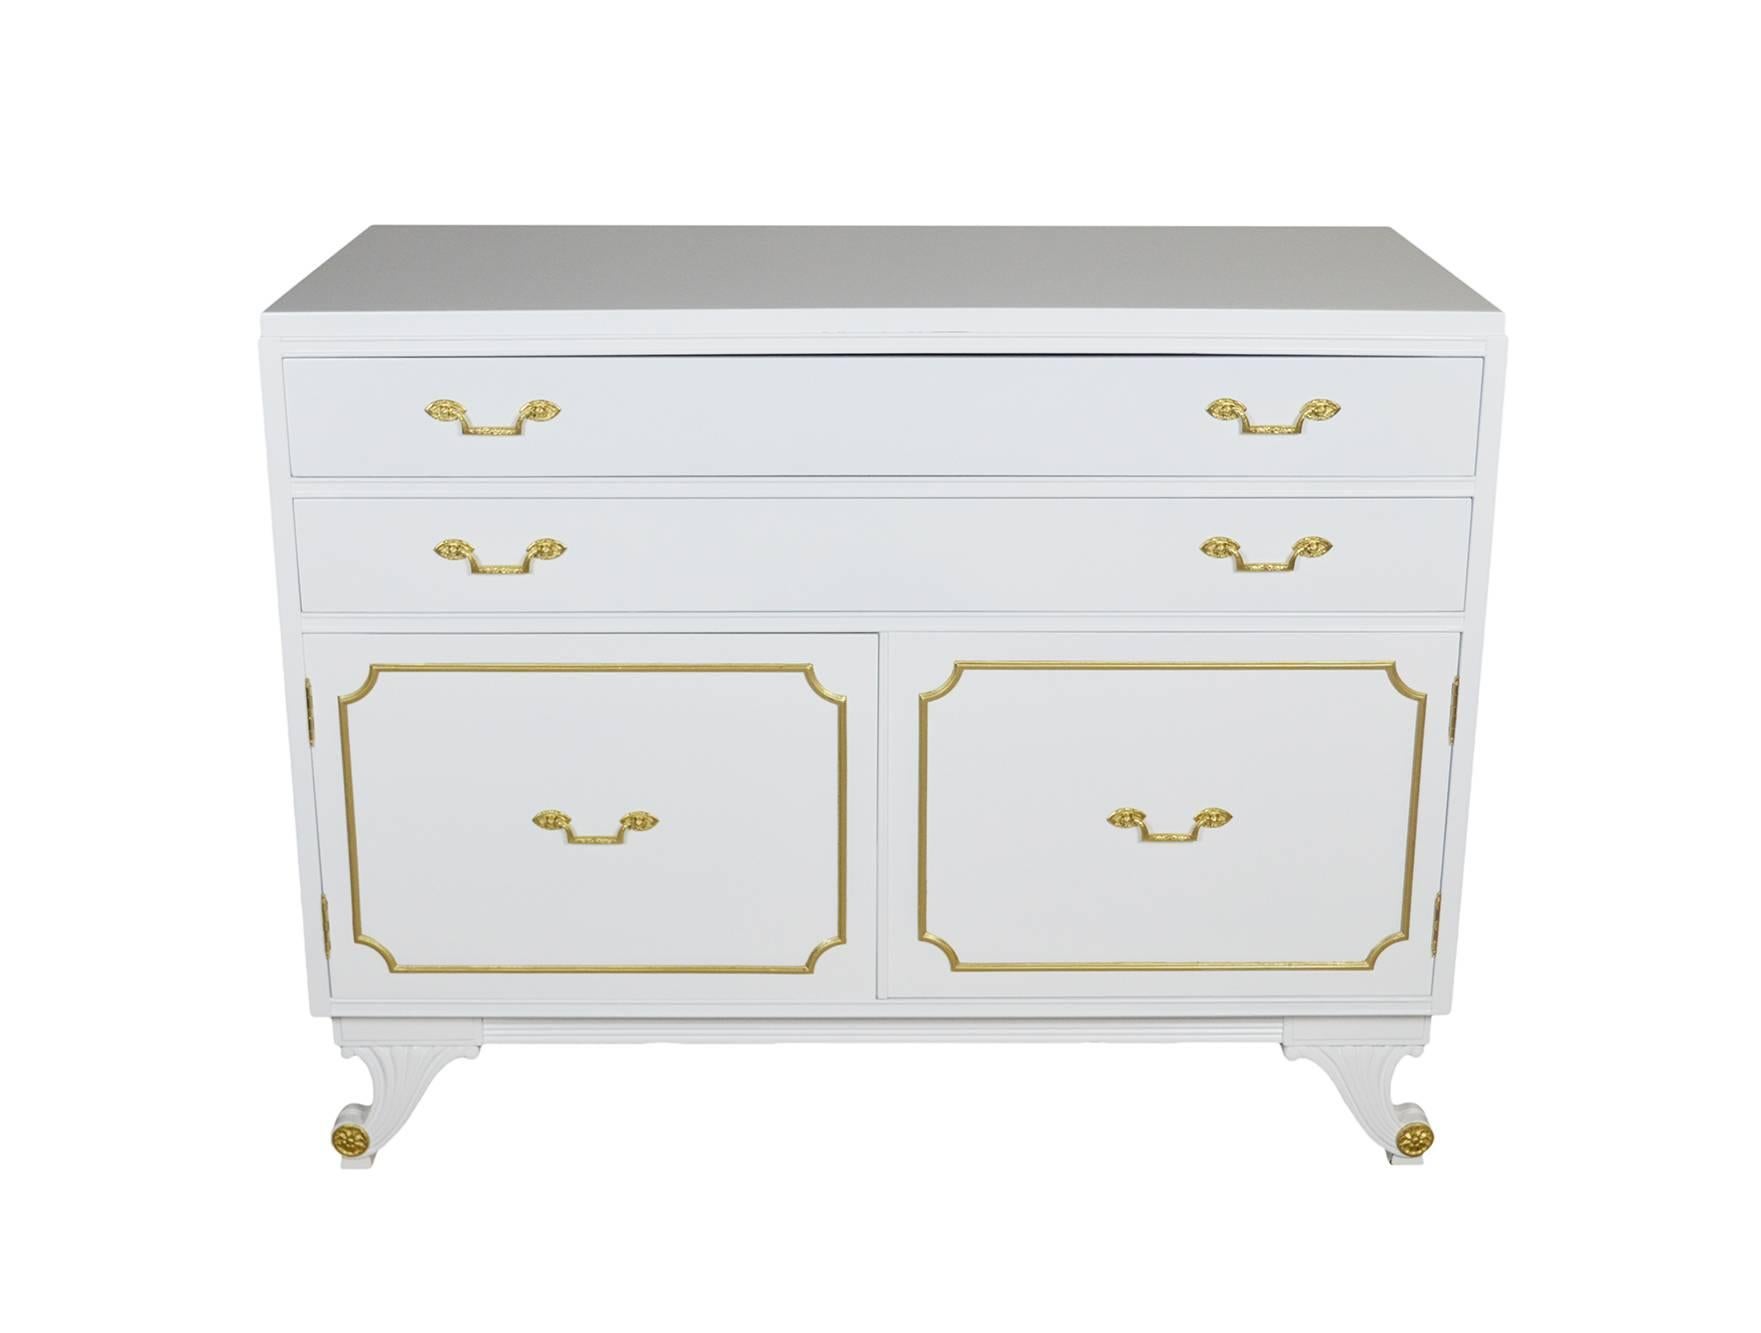 VIntage neoclassical style cabinet by RWAY newly lacquered in white. The cabinet has two drawers and a shelf inside the cabinet doors with brass hardware.